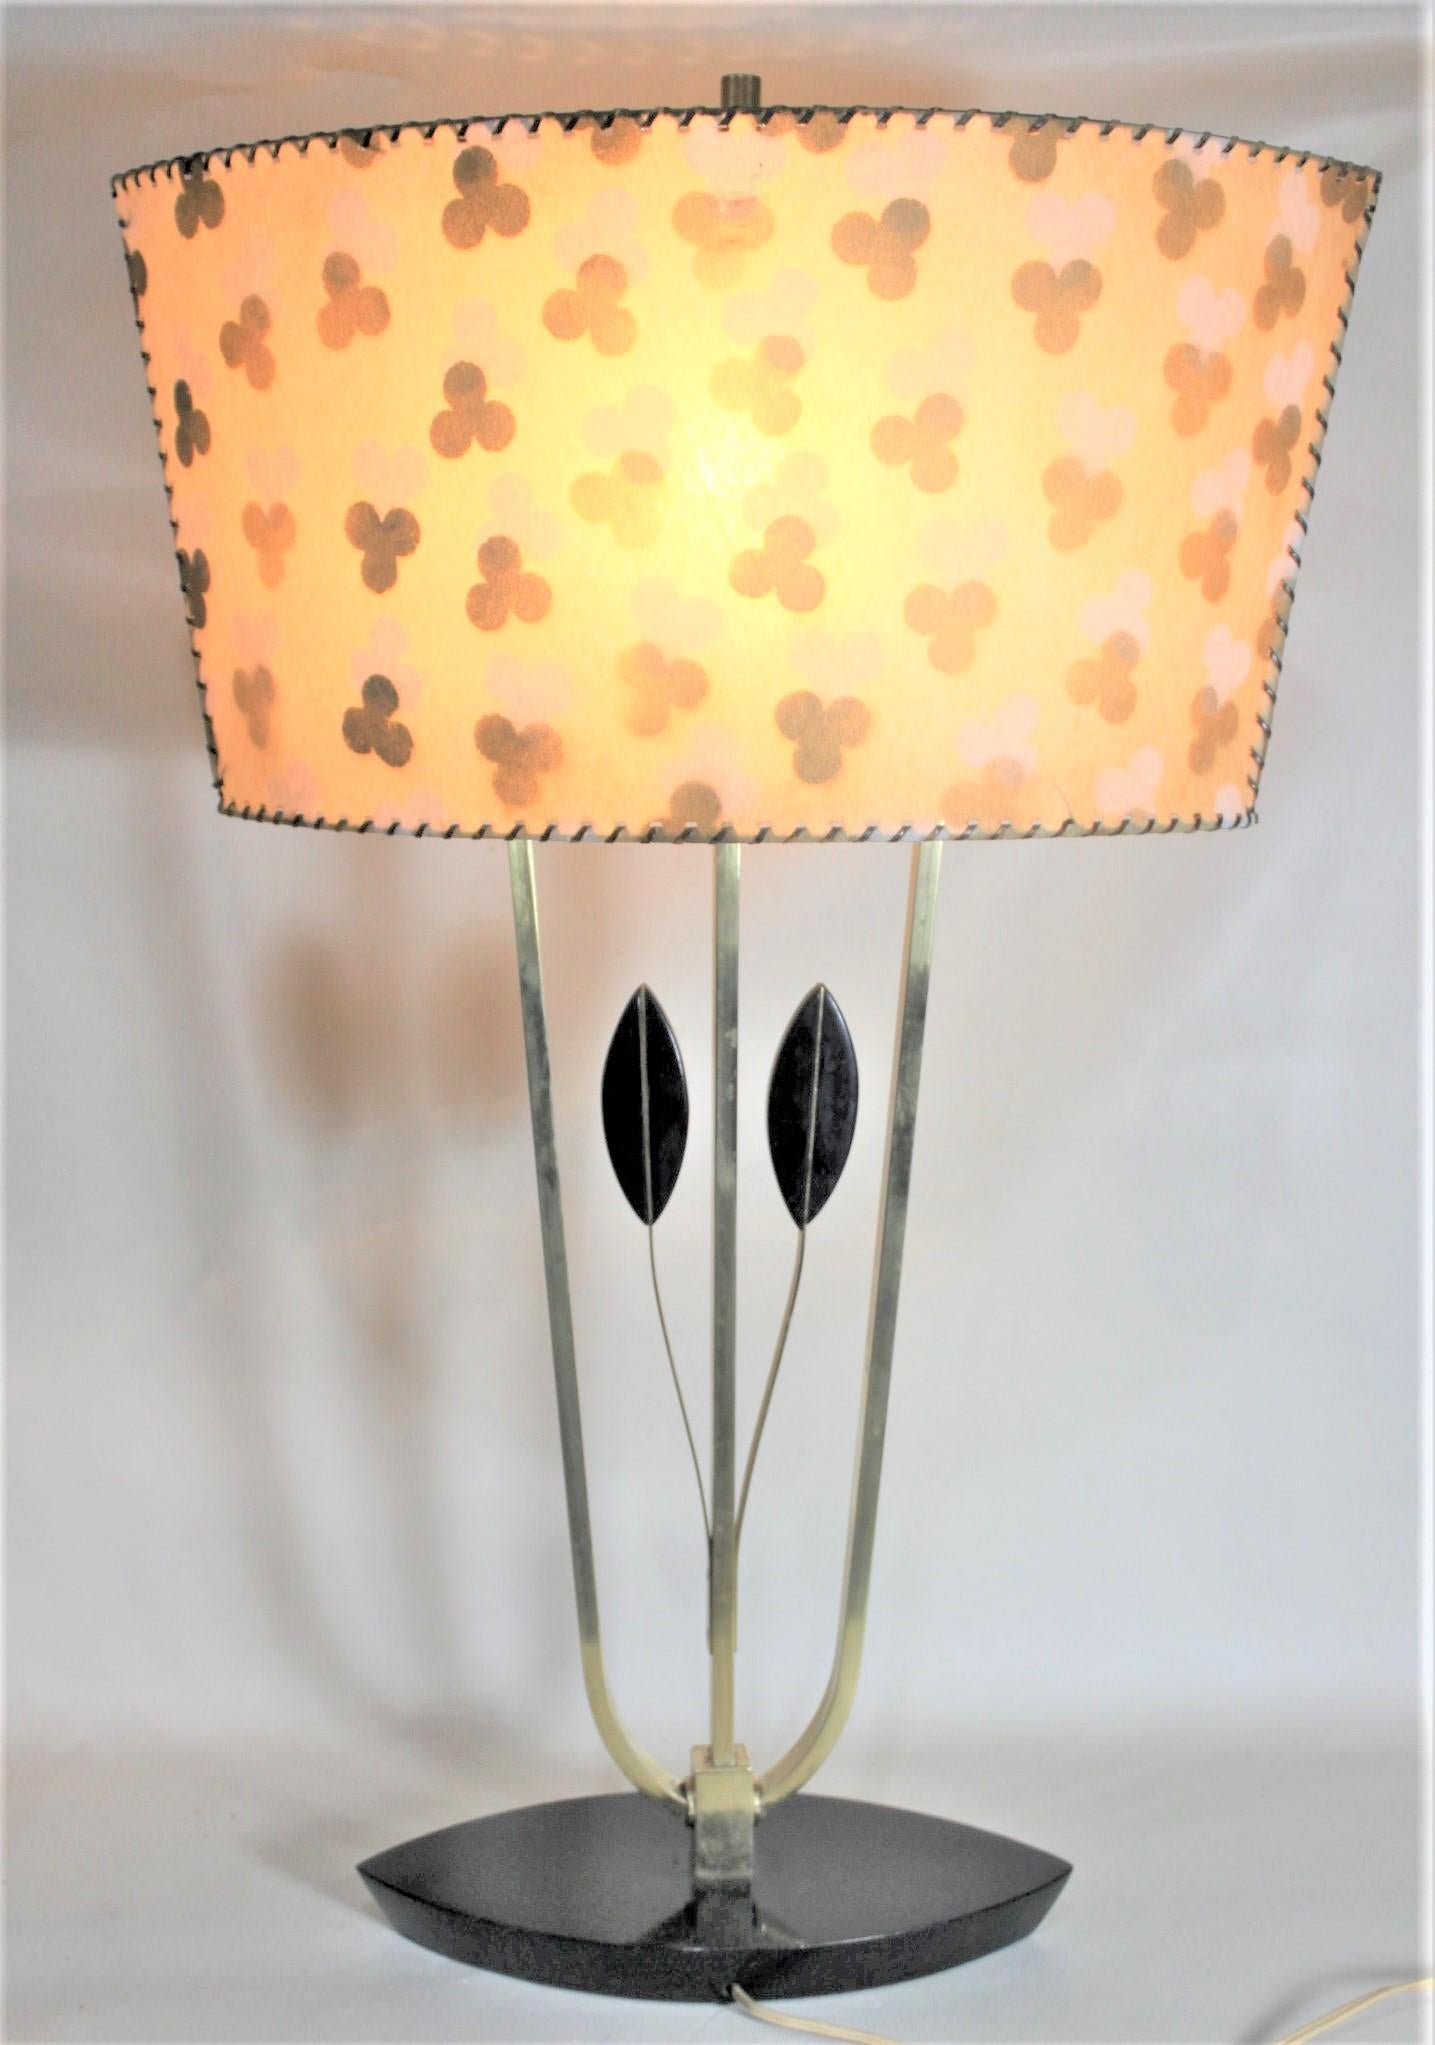 American Mid-Century Modern Rembrandt Styled Table Lamp with Patterned Fiberene Shade